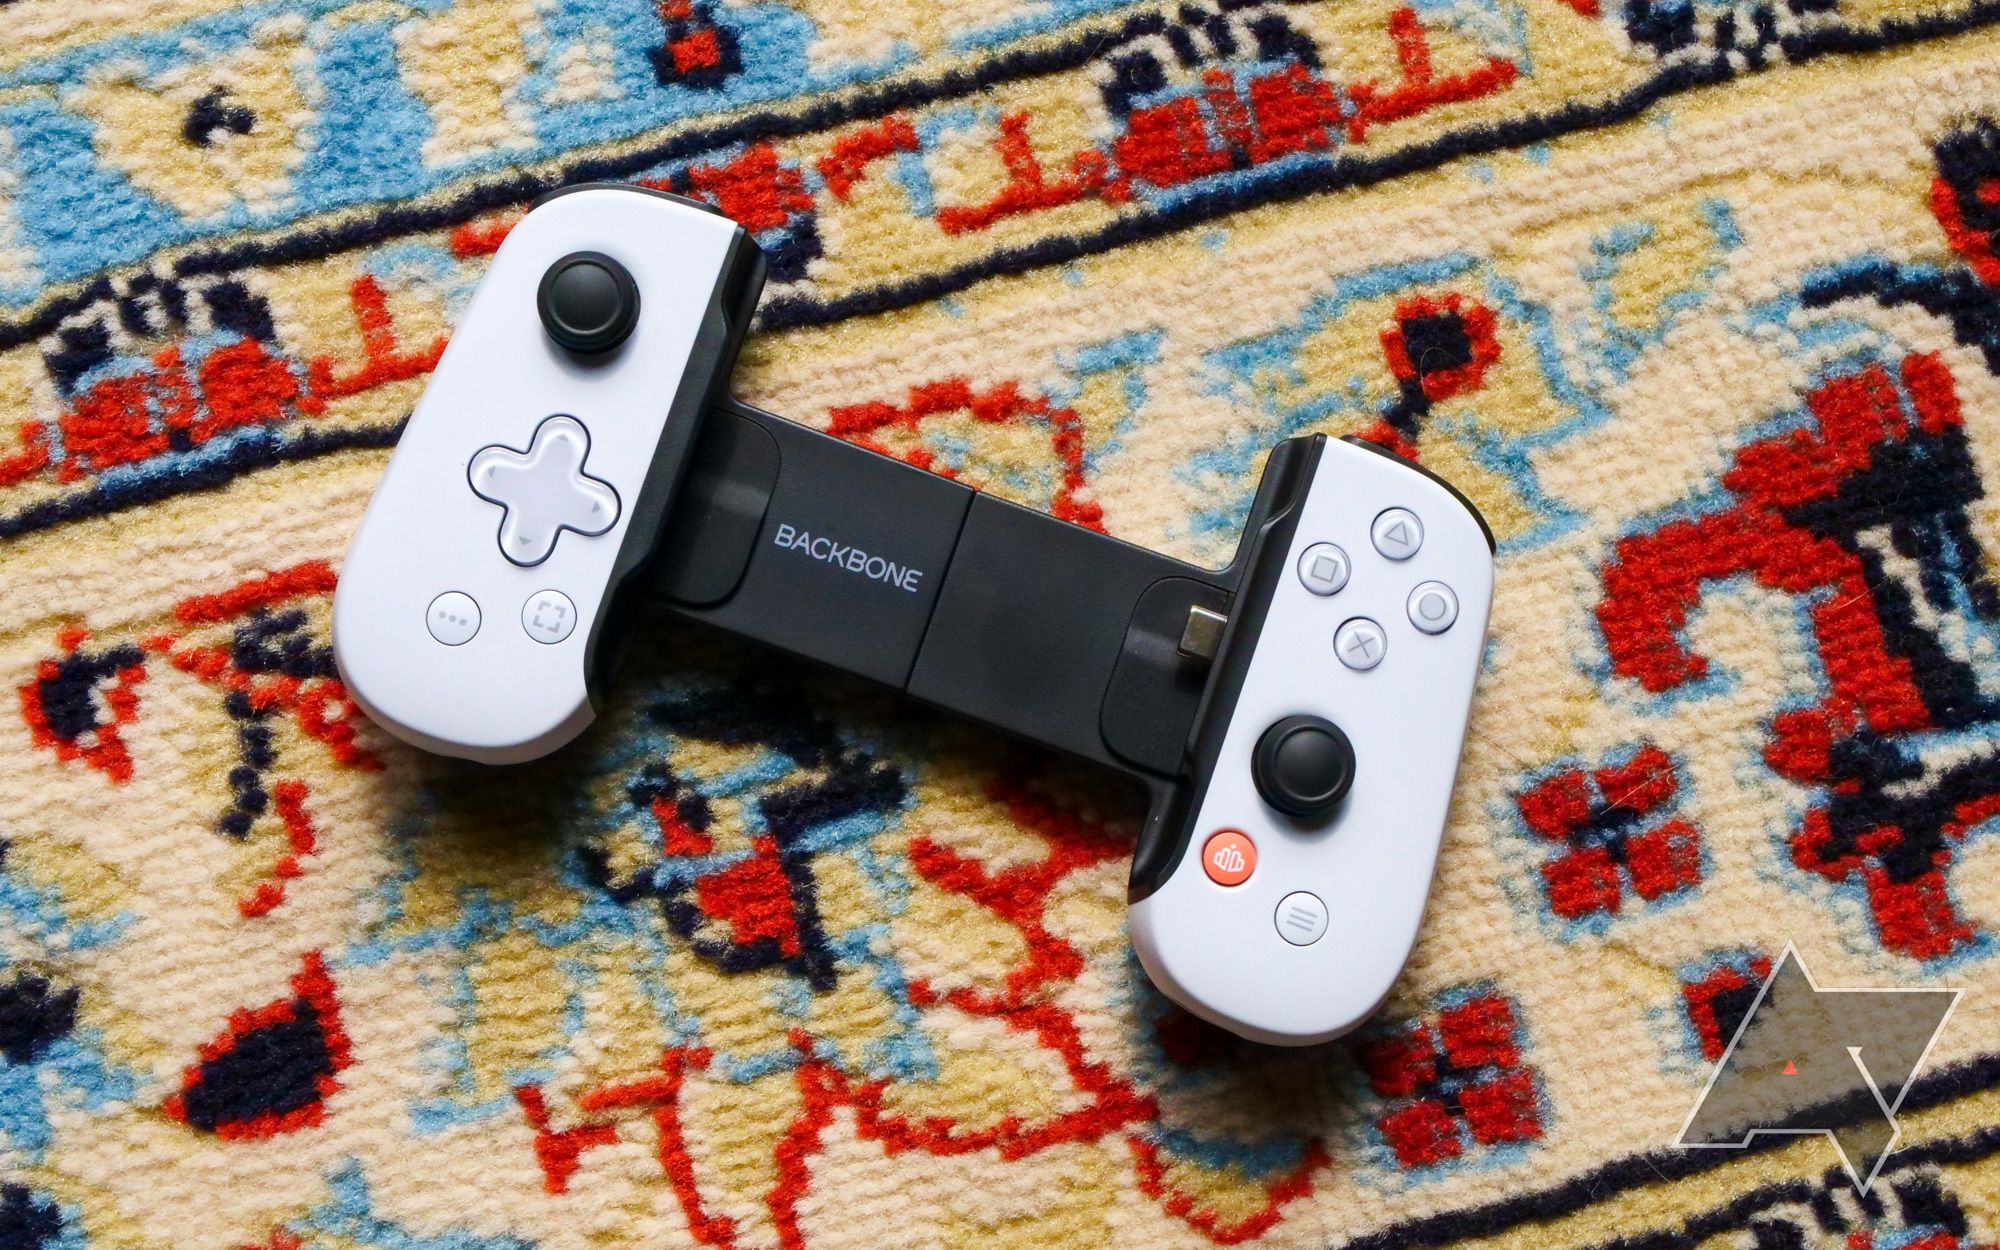 Backbone is bringing its PlayStation friendly controller to Android